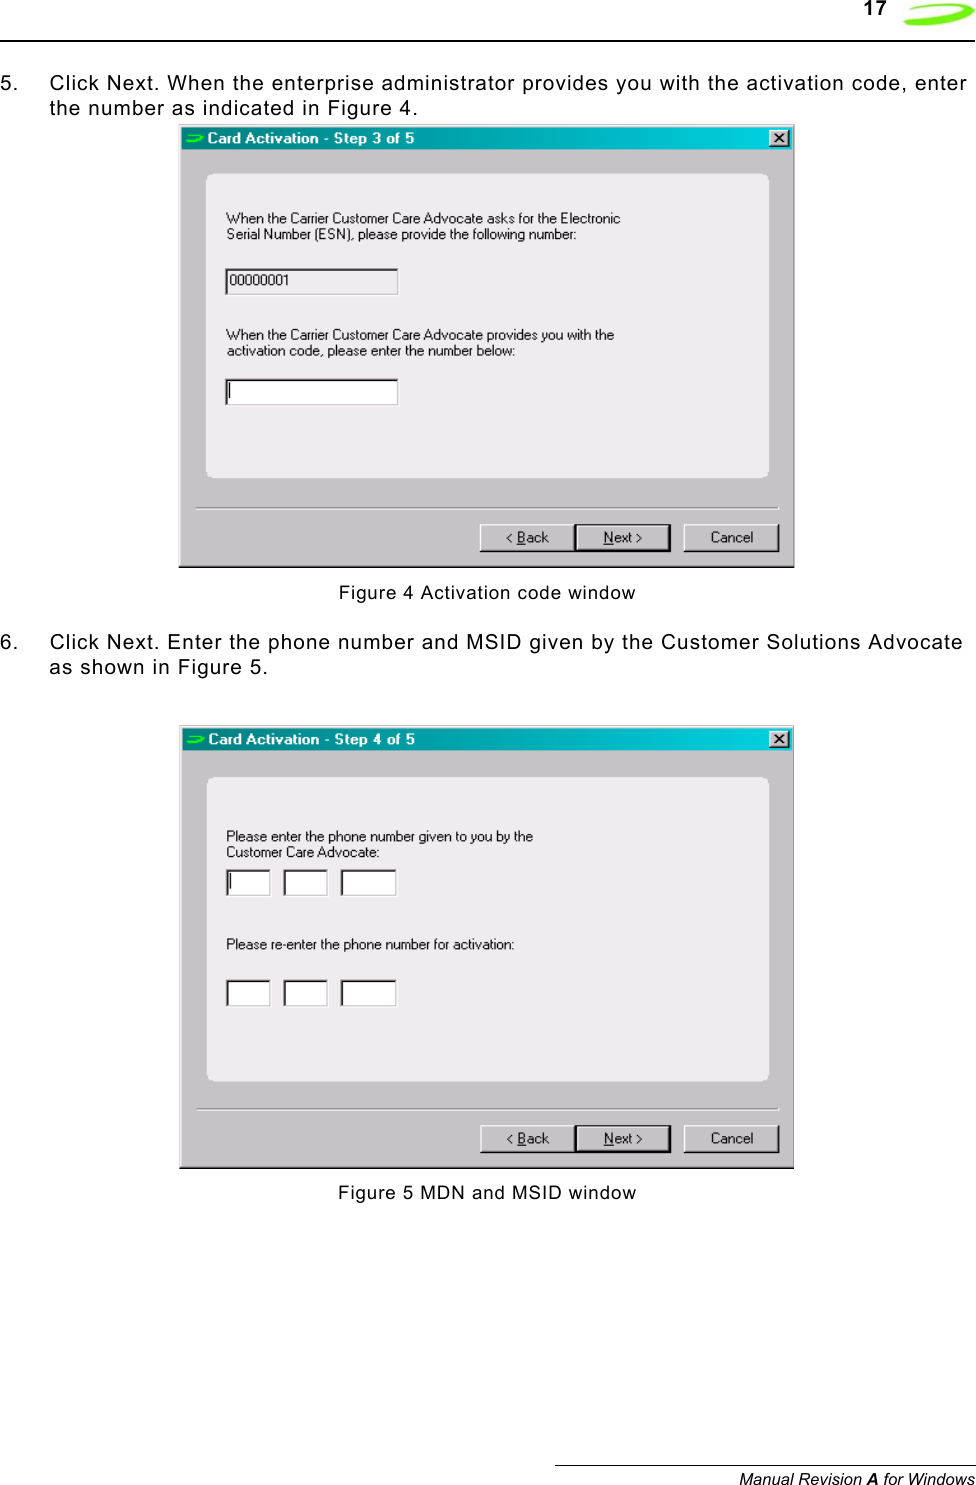    17Manual Revision A for Windows5. Click Next. When the enterprise administrator provides you with the activation code, enter the number as indicated in Figure 4.Figure 4 Activation code window6. Click Next. Enter the phone number and MSID given by the Customer Solutions Advocate as shown in Figure 5.Figure 5 MDN and MSID window